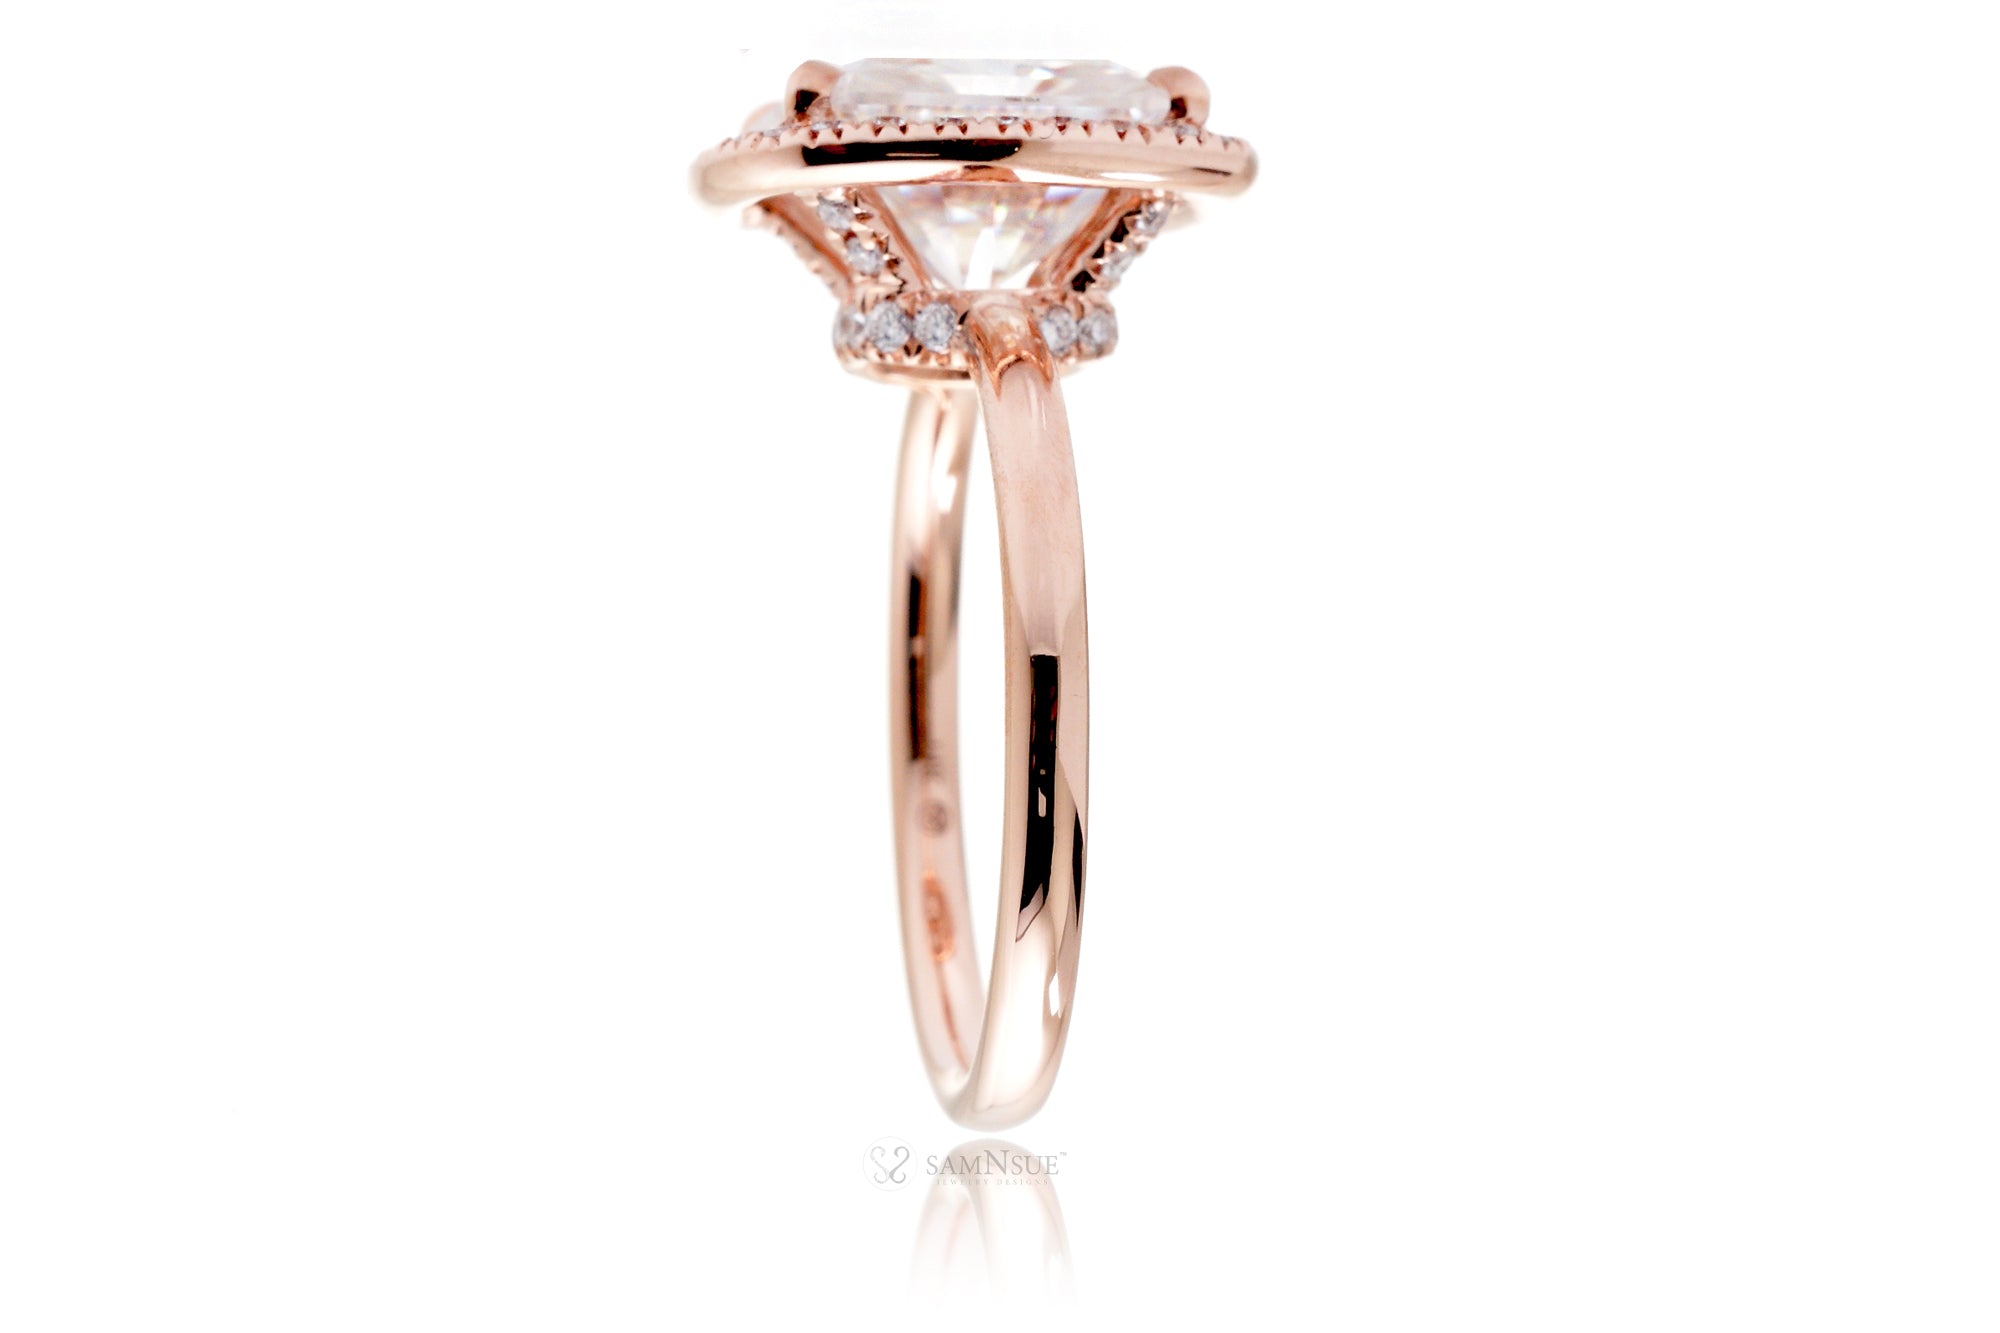 The Drenched Emerald Cut Moissanite